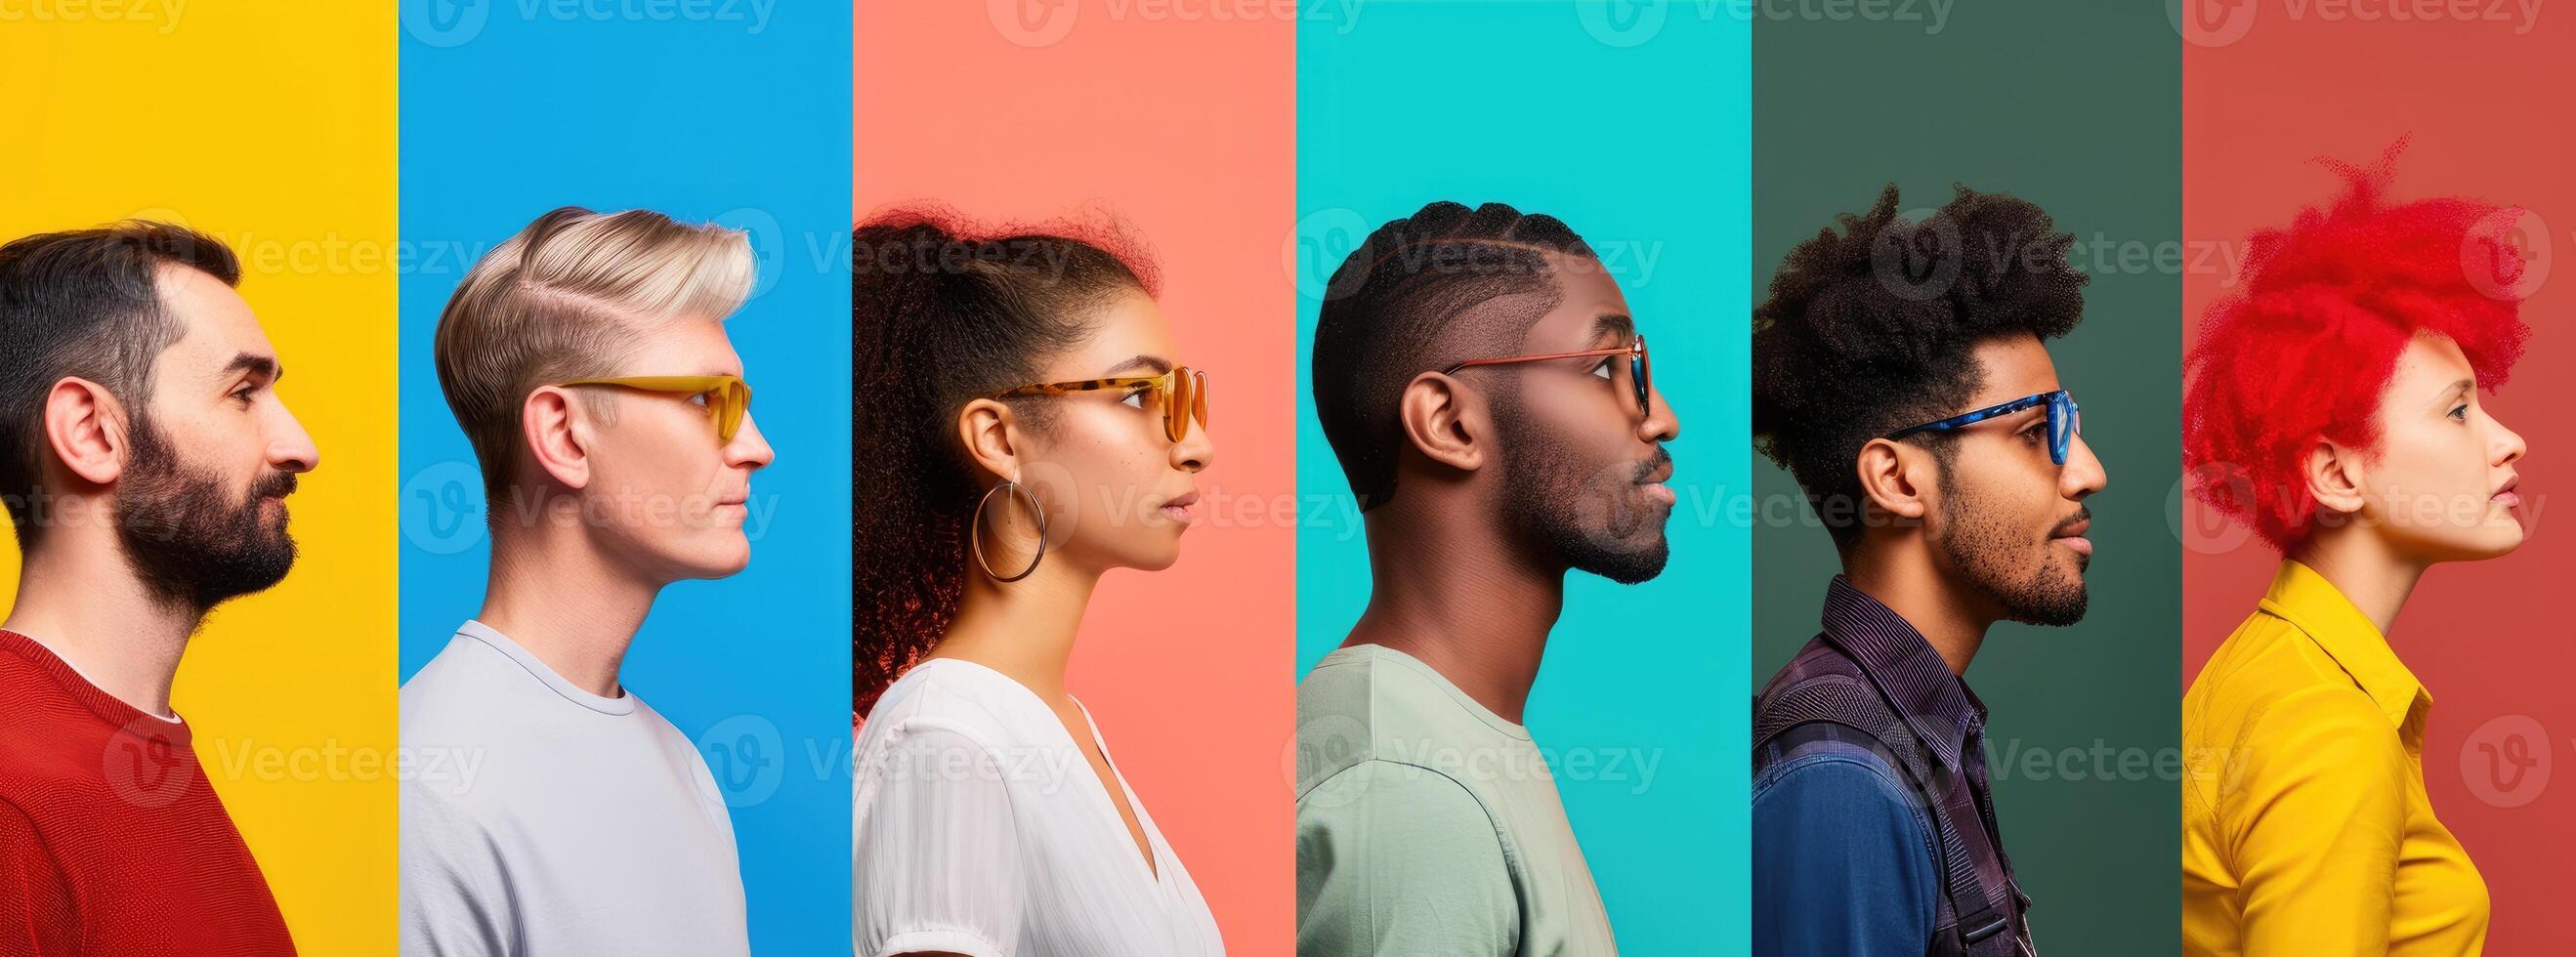 AI generated Diverse Individuals Profiled Against Bold, Colorful Backgrounds. photo